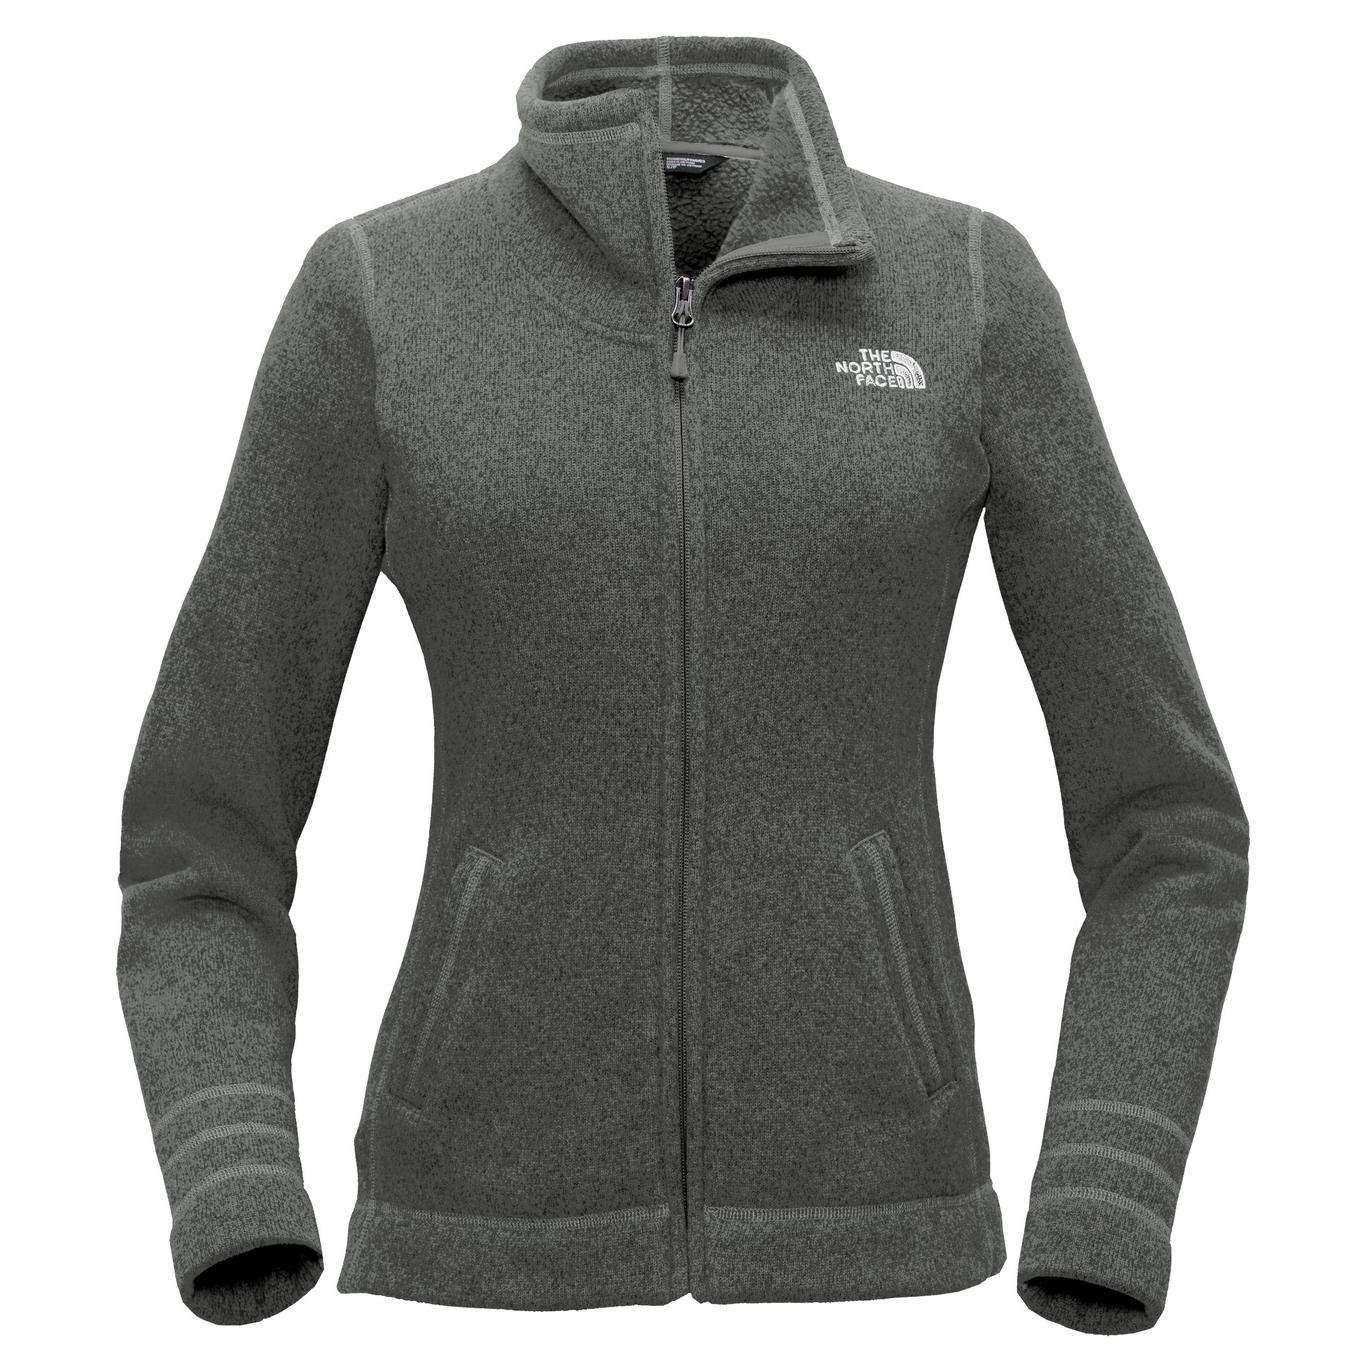 The North Face NF0A3LH8 Ladies Sweater Fleece Jacket - Black Heather ...